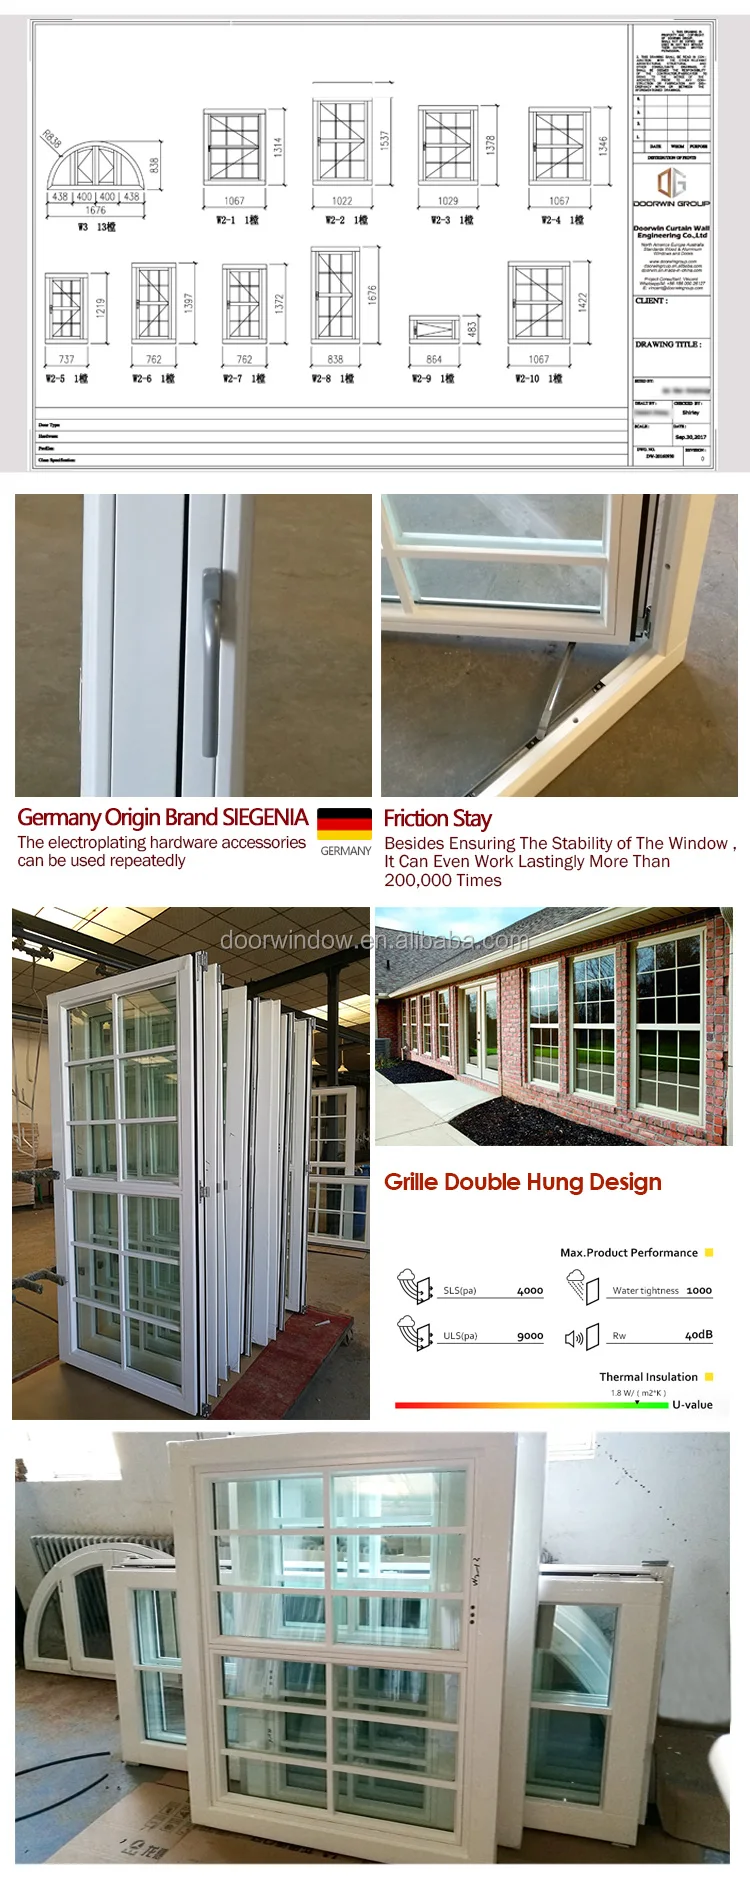 Awning handle crank casement windows with low price and high quality aluminum